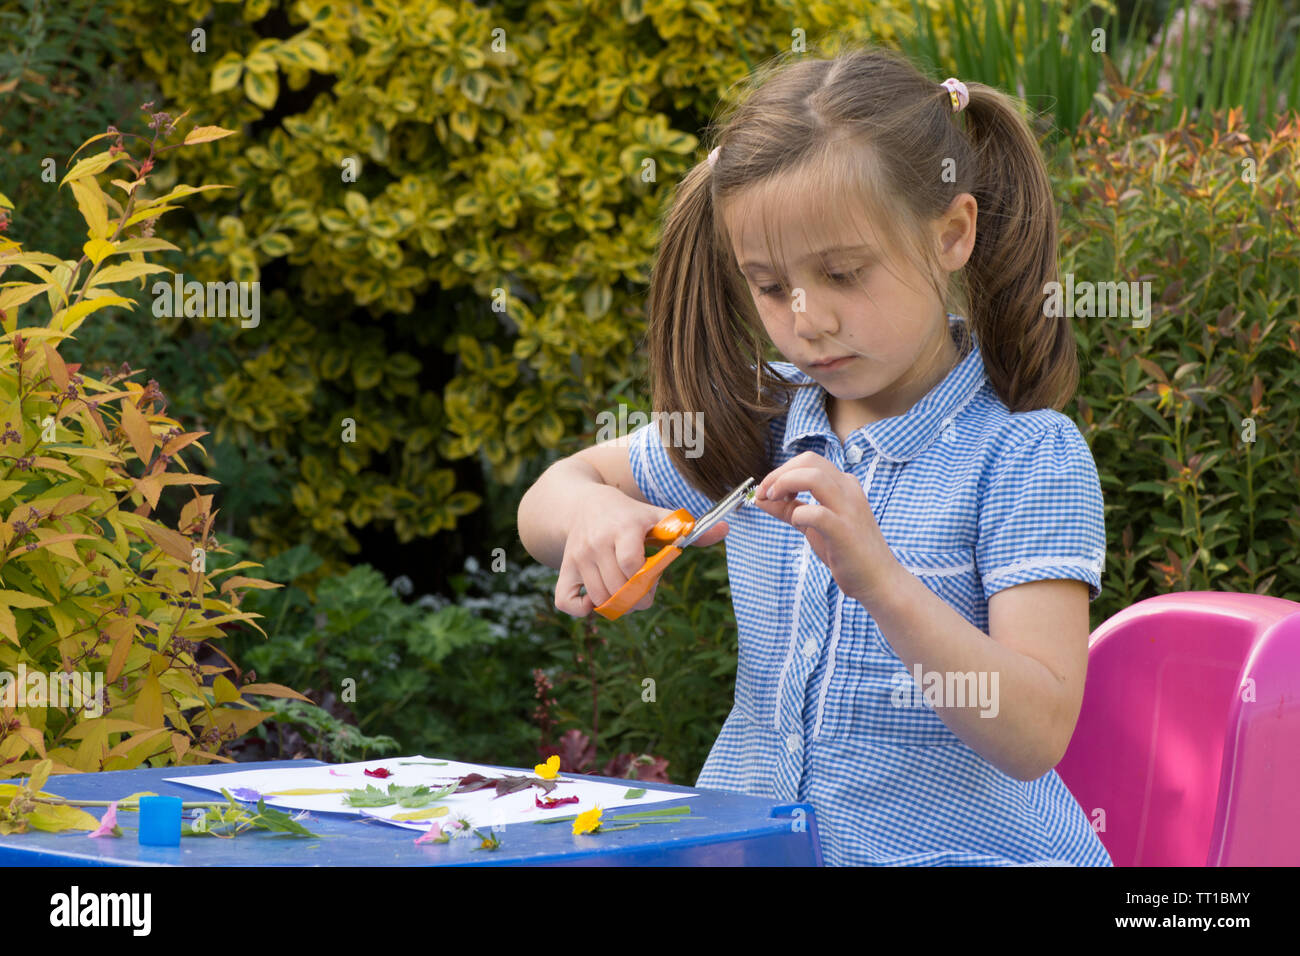 eight year old girl in school uniform dress in garden, making a picture made from flowers and leaves stuck on paper, nature art craft, using scissors Stock Photo